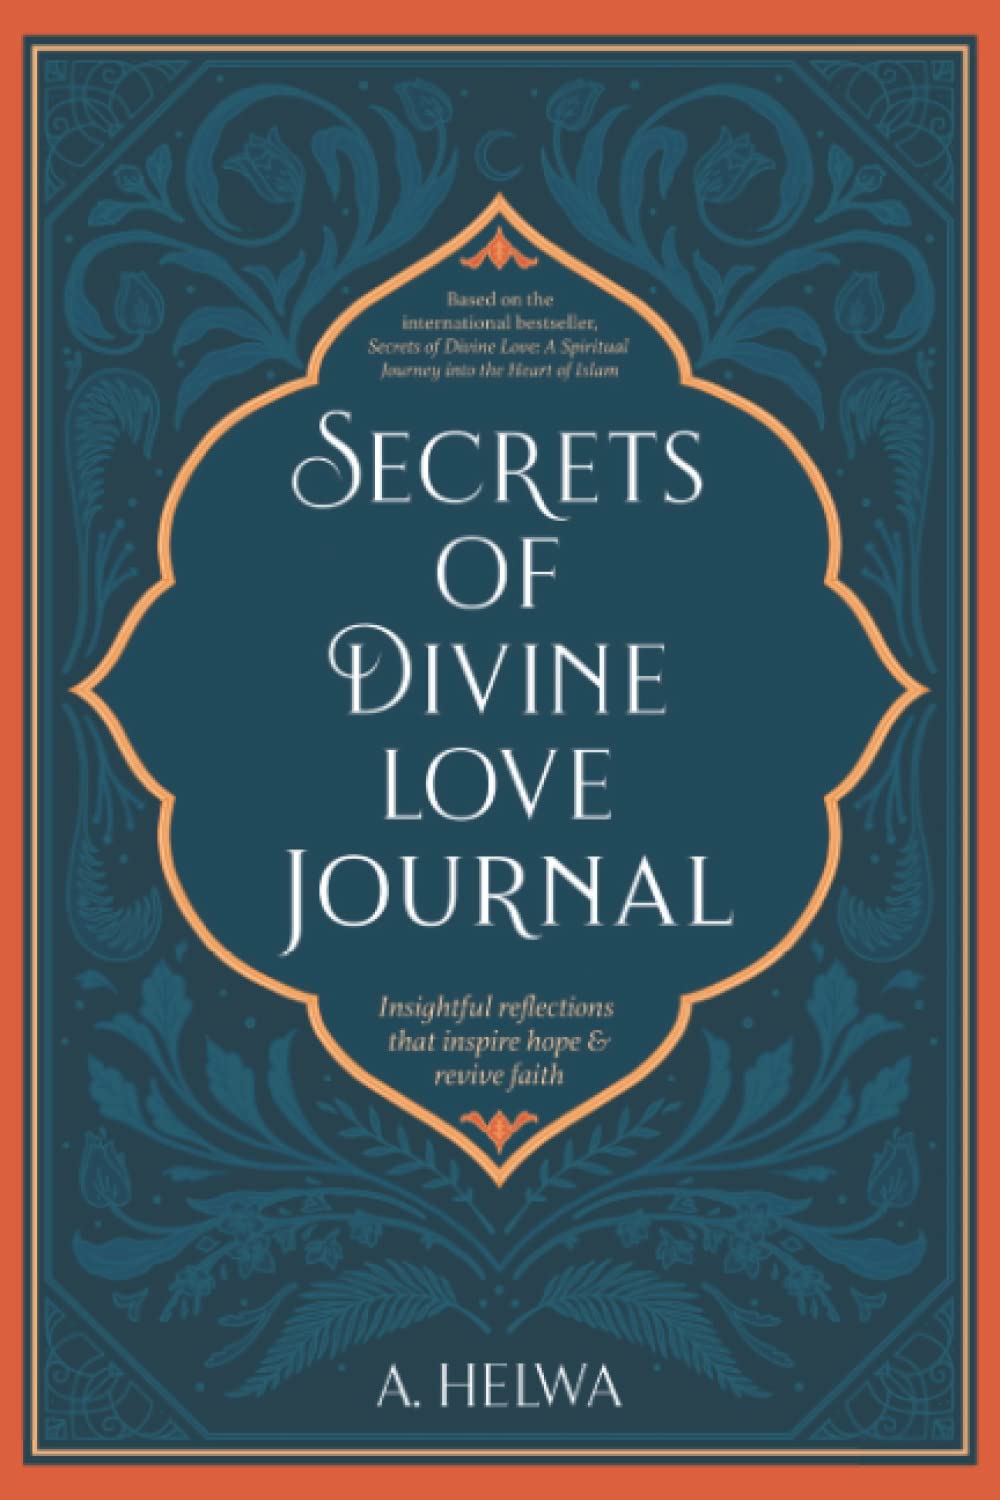 Secrets of Divine Love Journal: A Spiritual Journey into the Heart of Islam - Noor Books